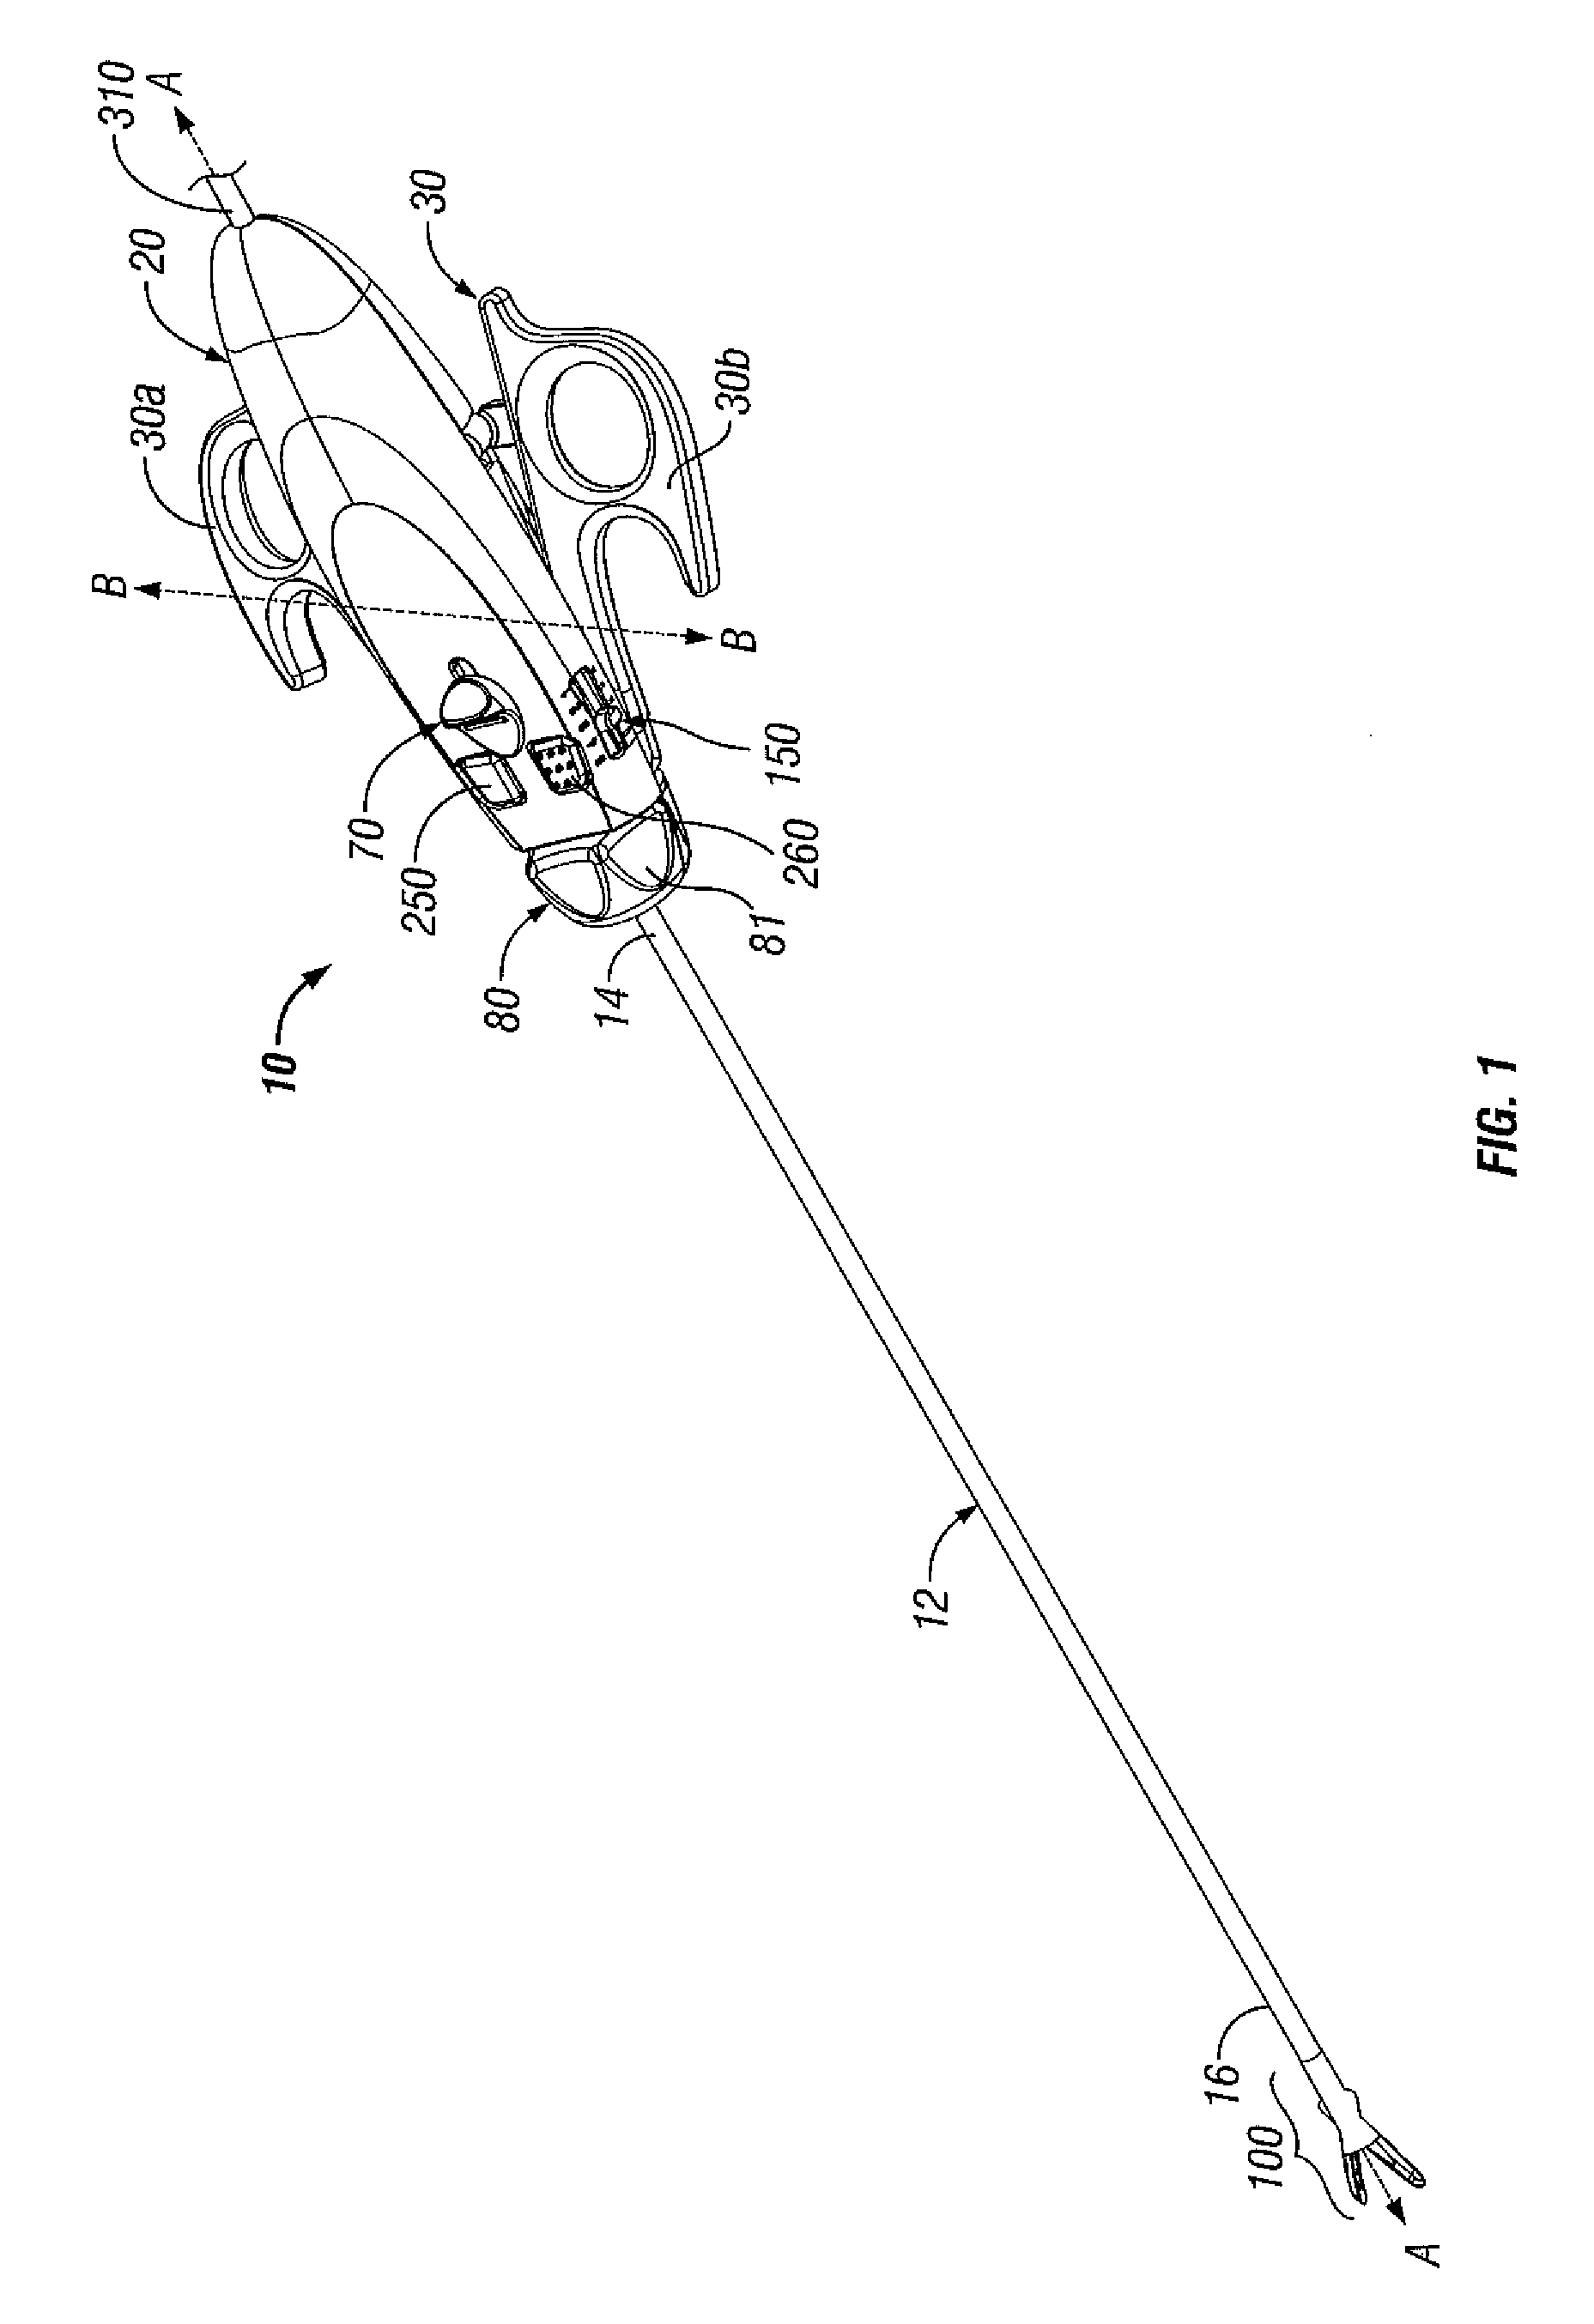 Insulating Boot for Electrosurgical Forceps with Exohinged Structure